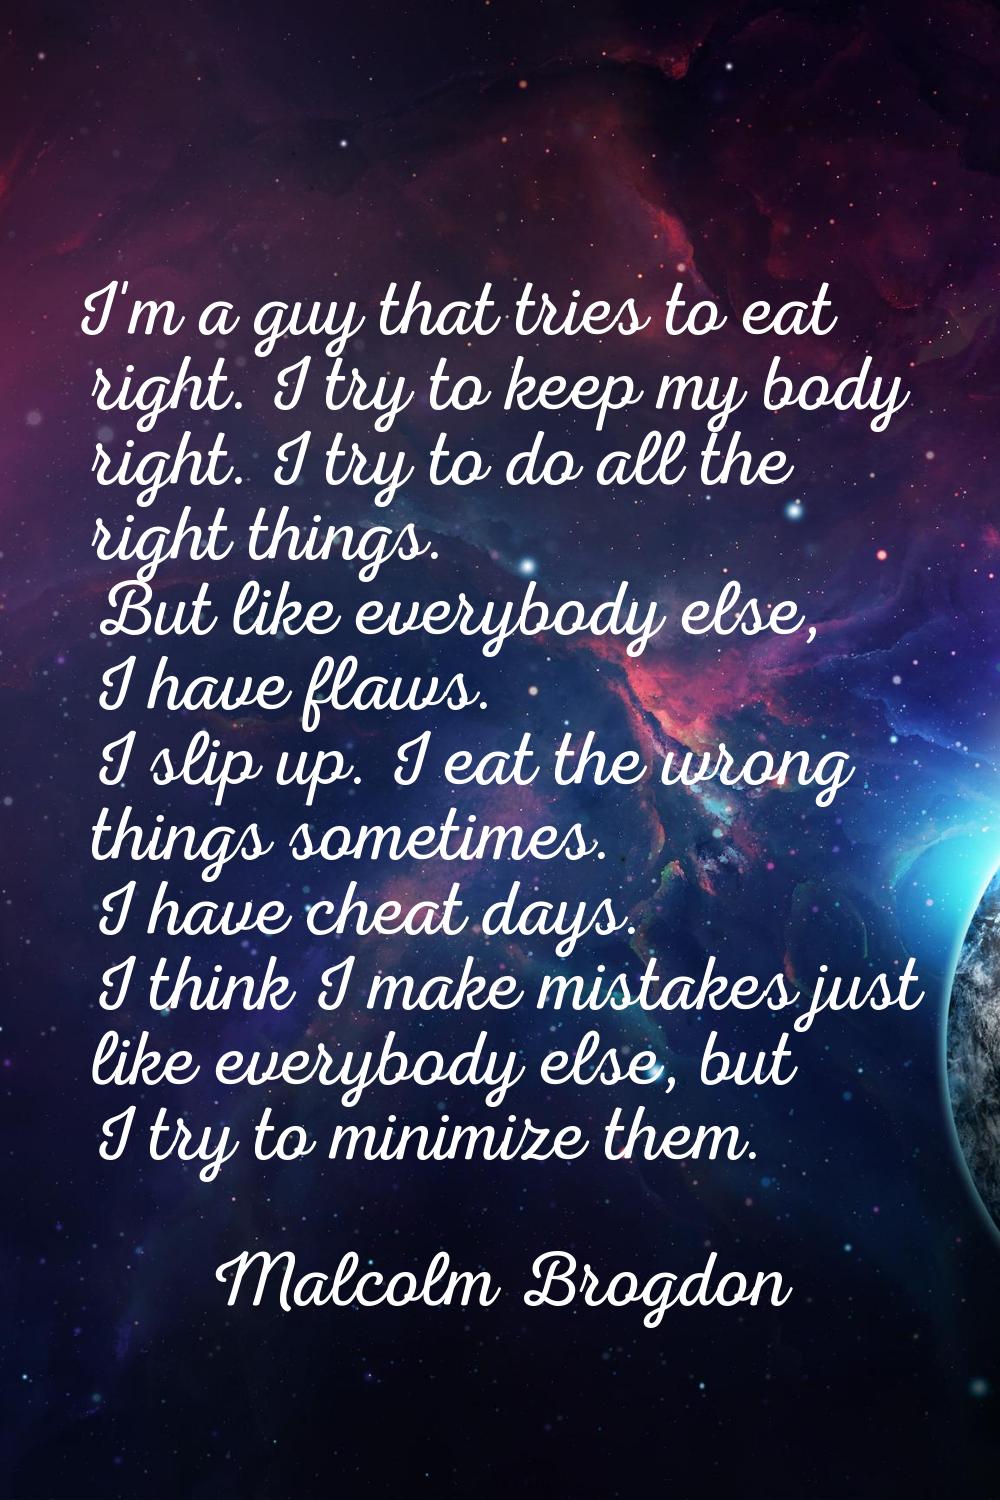 I'm a guy that tries to eat right. I try to keep my body right. I try to do all the right things. B